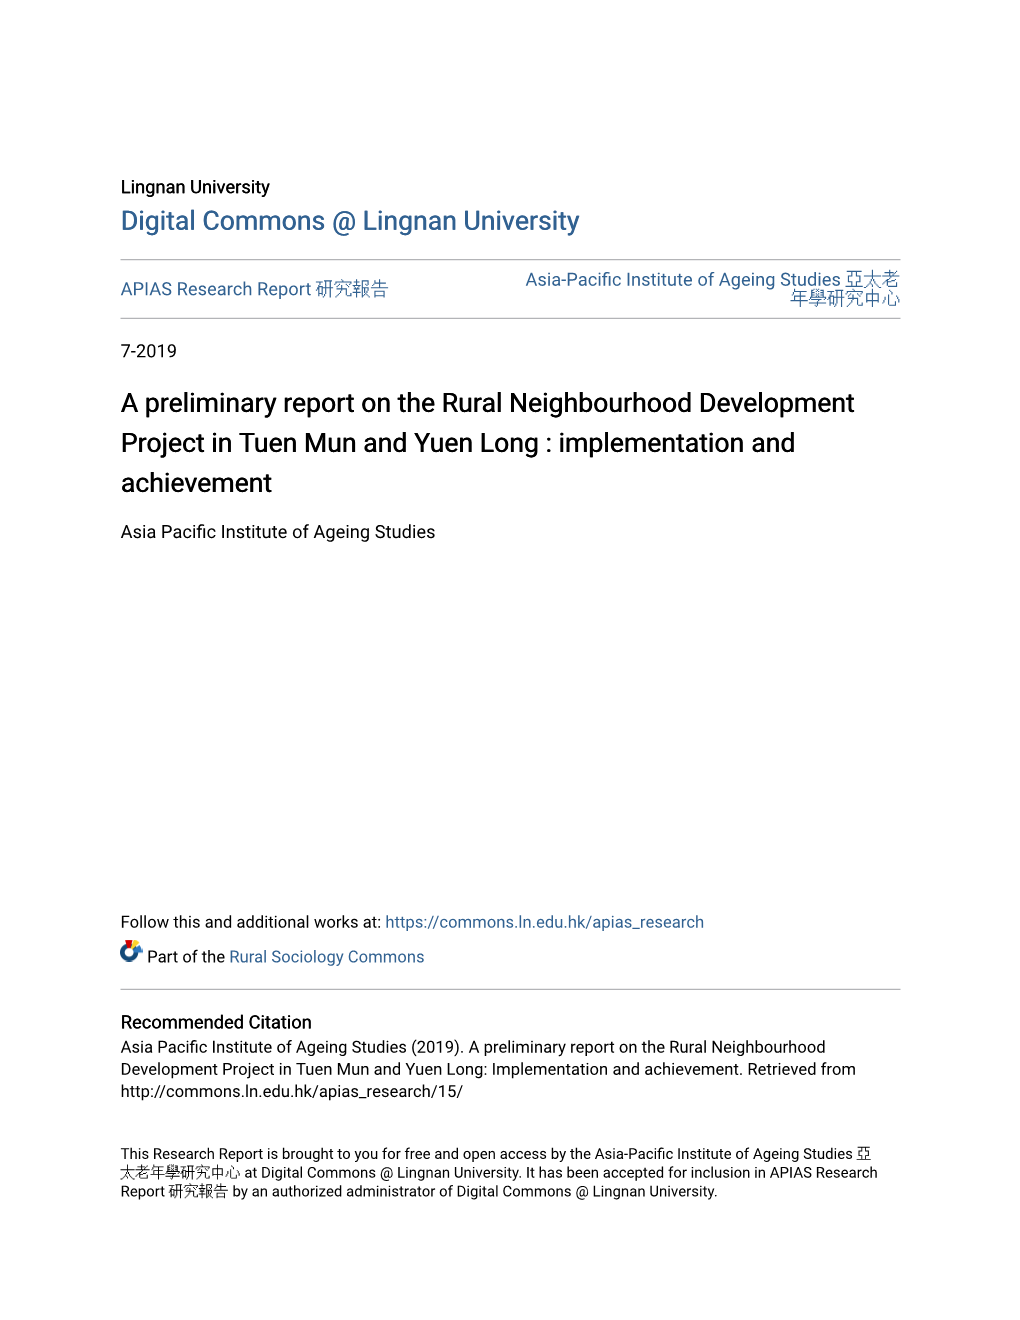 A Preliminary Report on the Rural Neighbourhood Development Project in Tuen Mun and Yuen Long : Implementation and Achievement